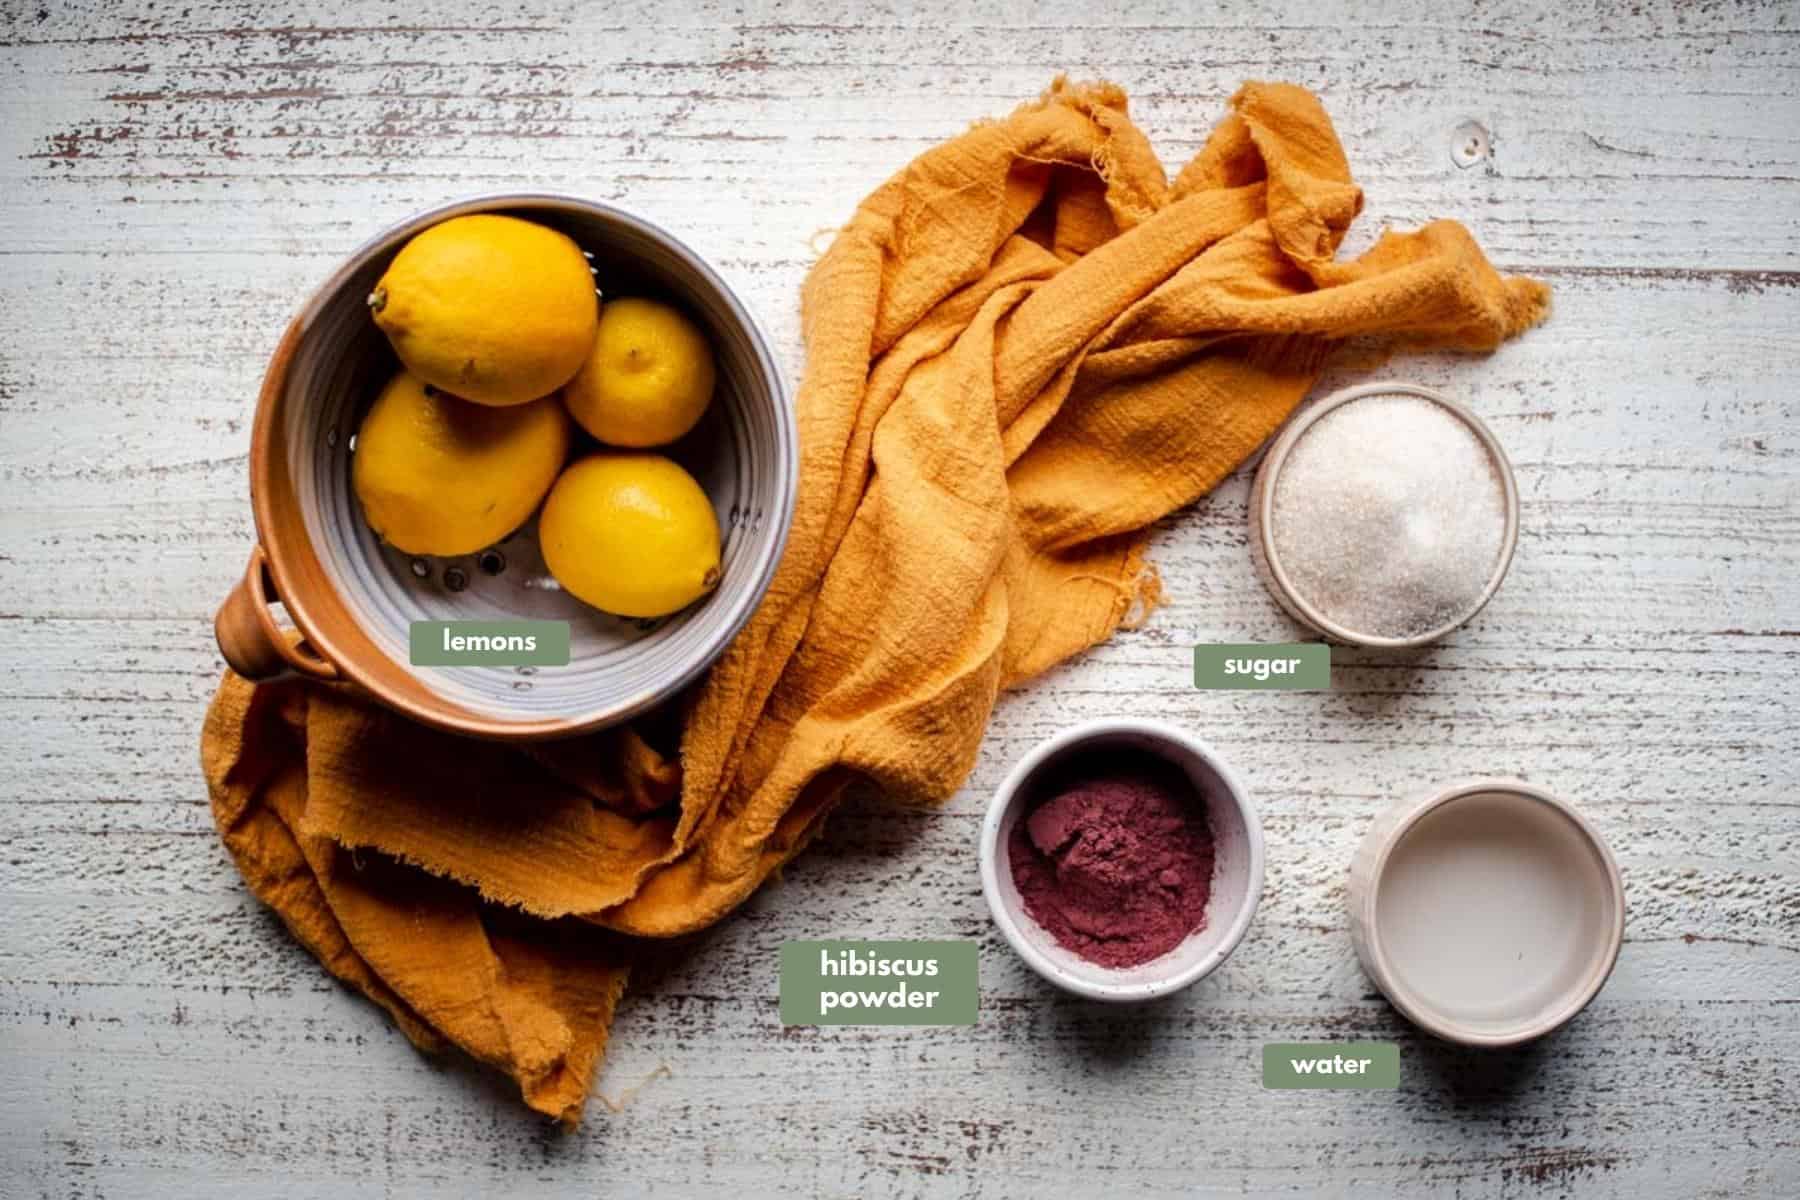 overhead image of ingredients for hibiscus lemonade.  Lemons are sitting in a gold and white ceramic bowl over a yellow linen napkin.  Sugar, water, and hibiscus powder in cream colored ramekins.